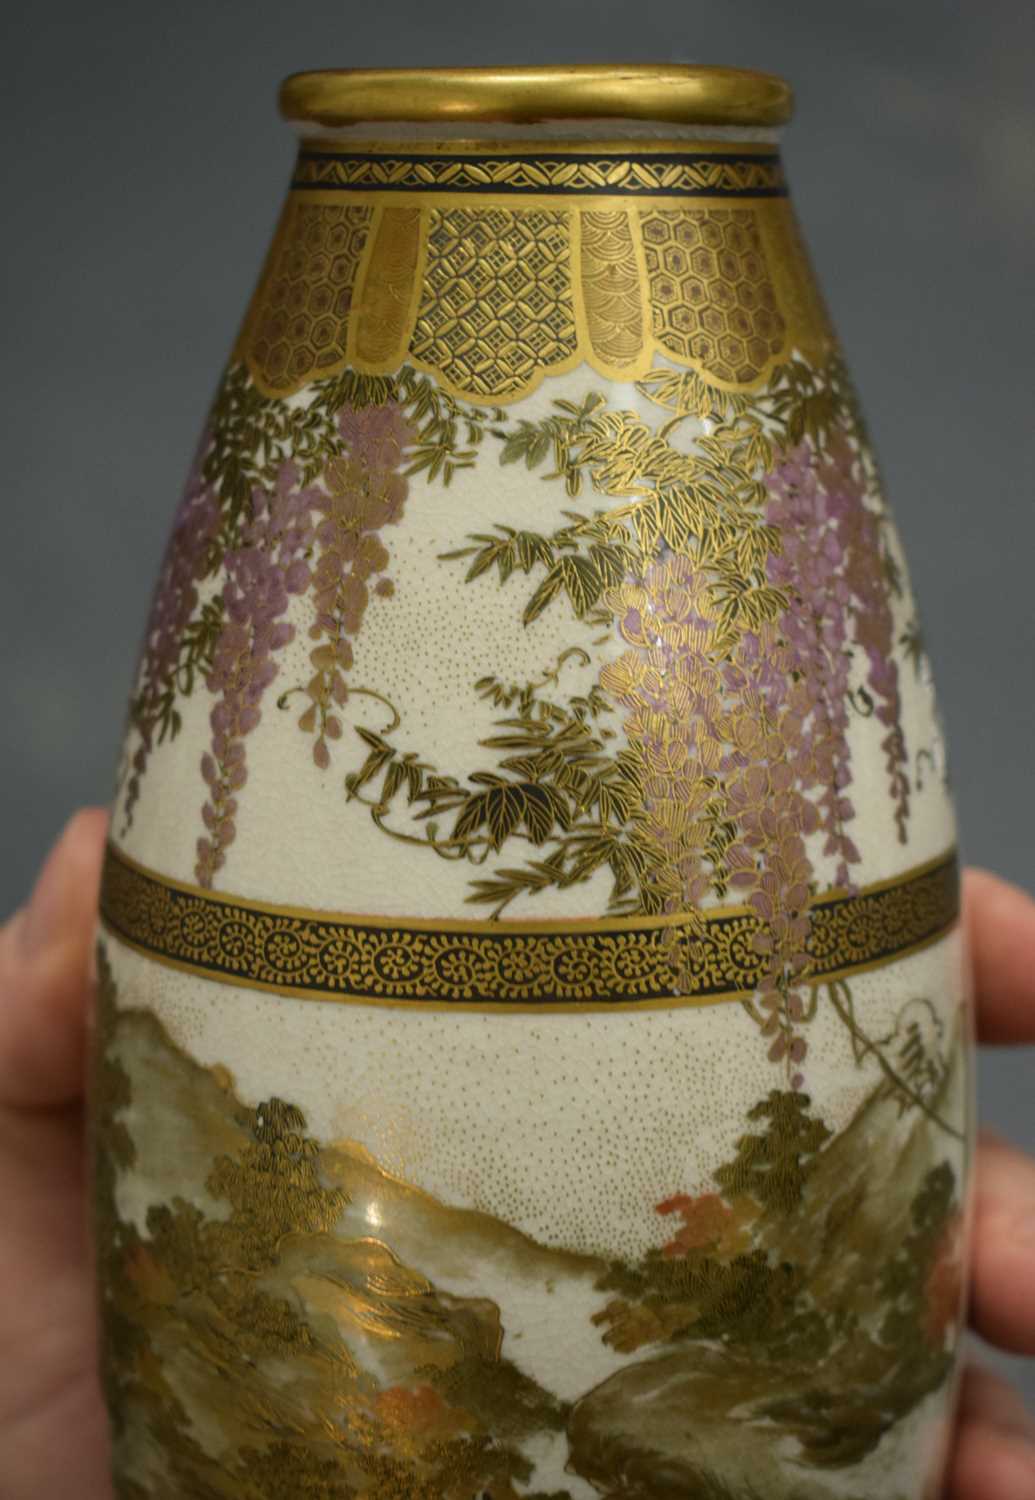 A PAIR OF LATE 19TH CENTURY JAPANESE MEIJI PERIOD SATSUMA POTTERY VASES painted with a group of - Image 24 of 25